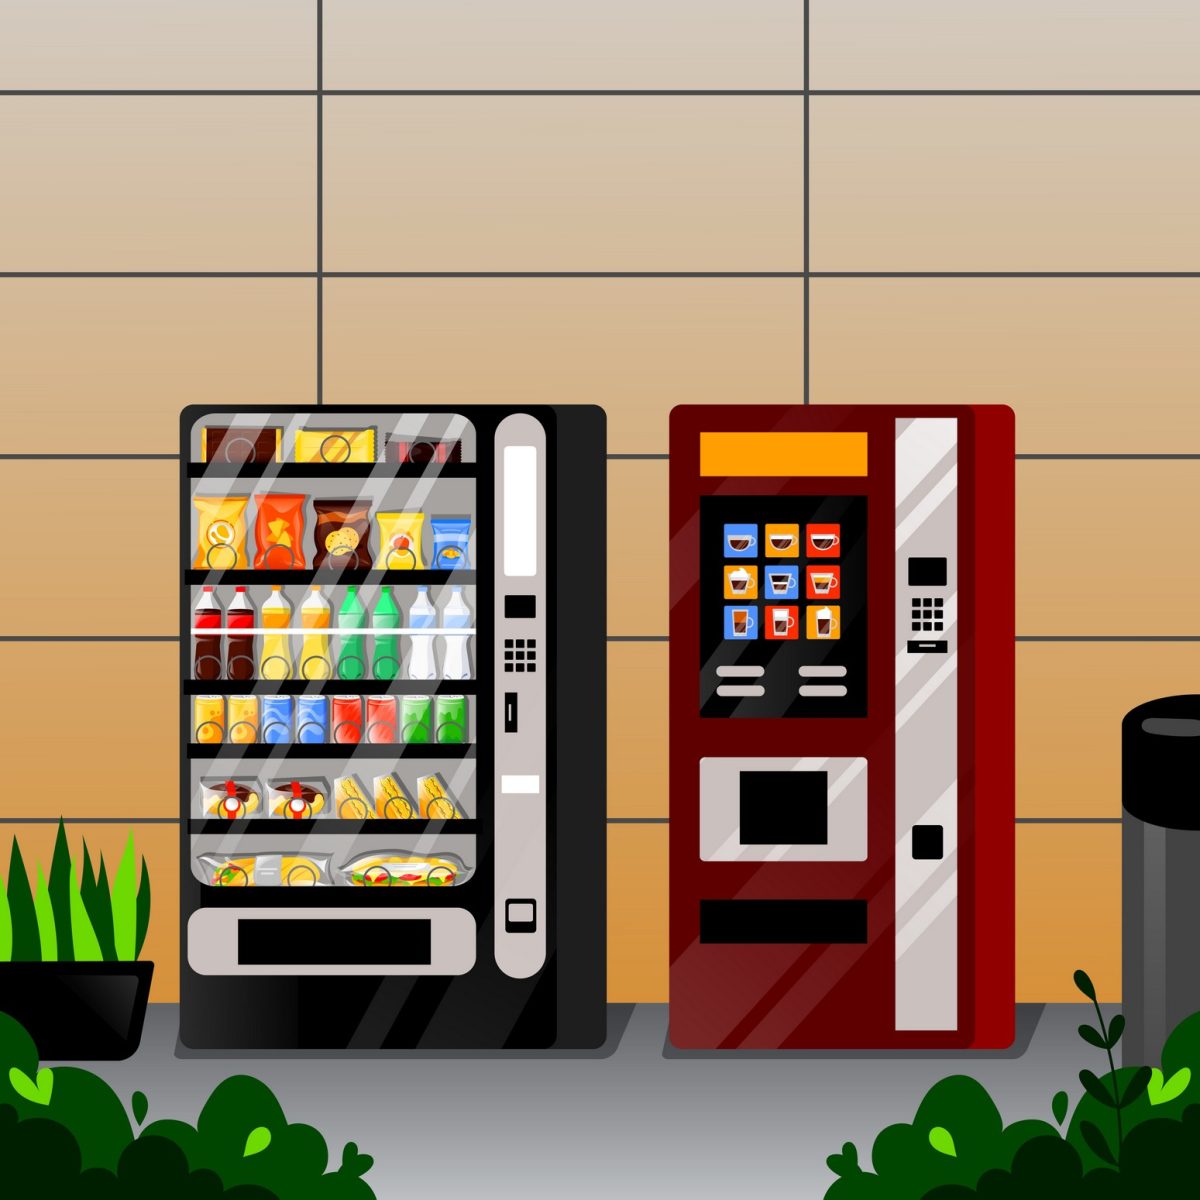 Tucson Corporate Wellness | Better-for-you Products | Healthy Vending Options